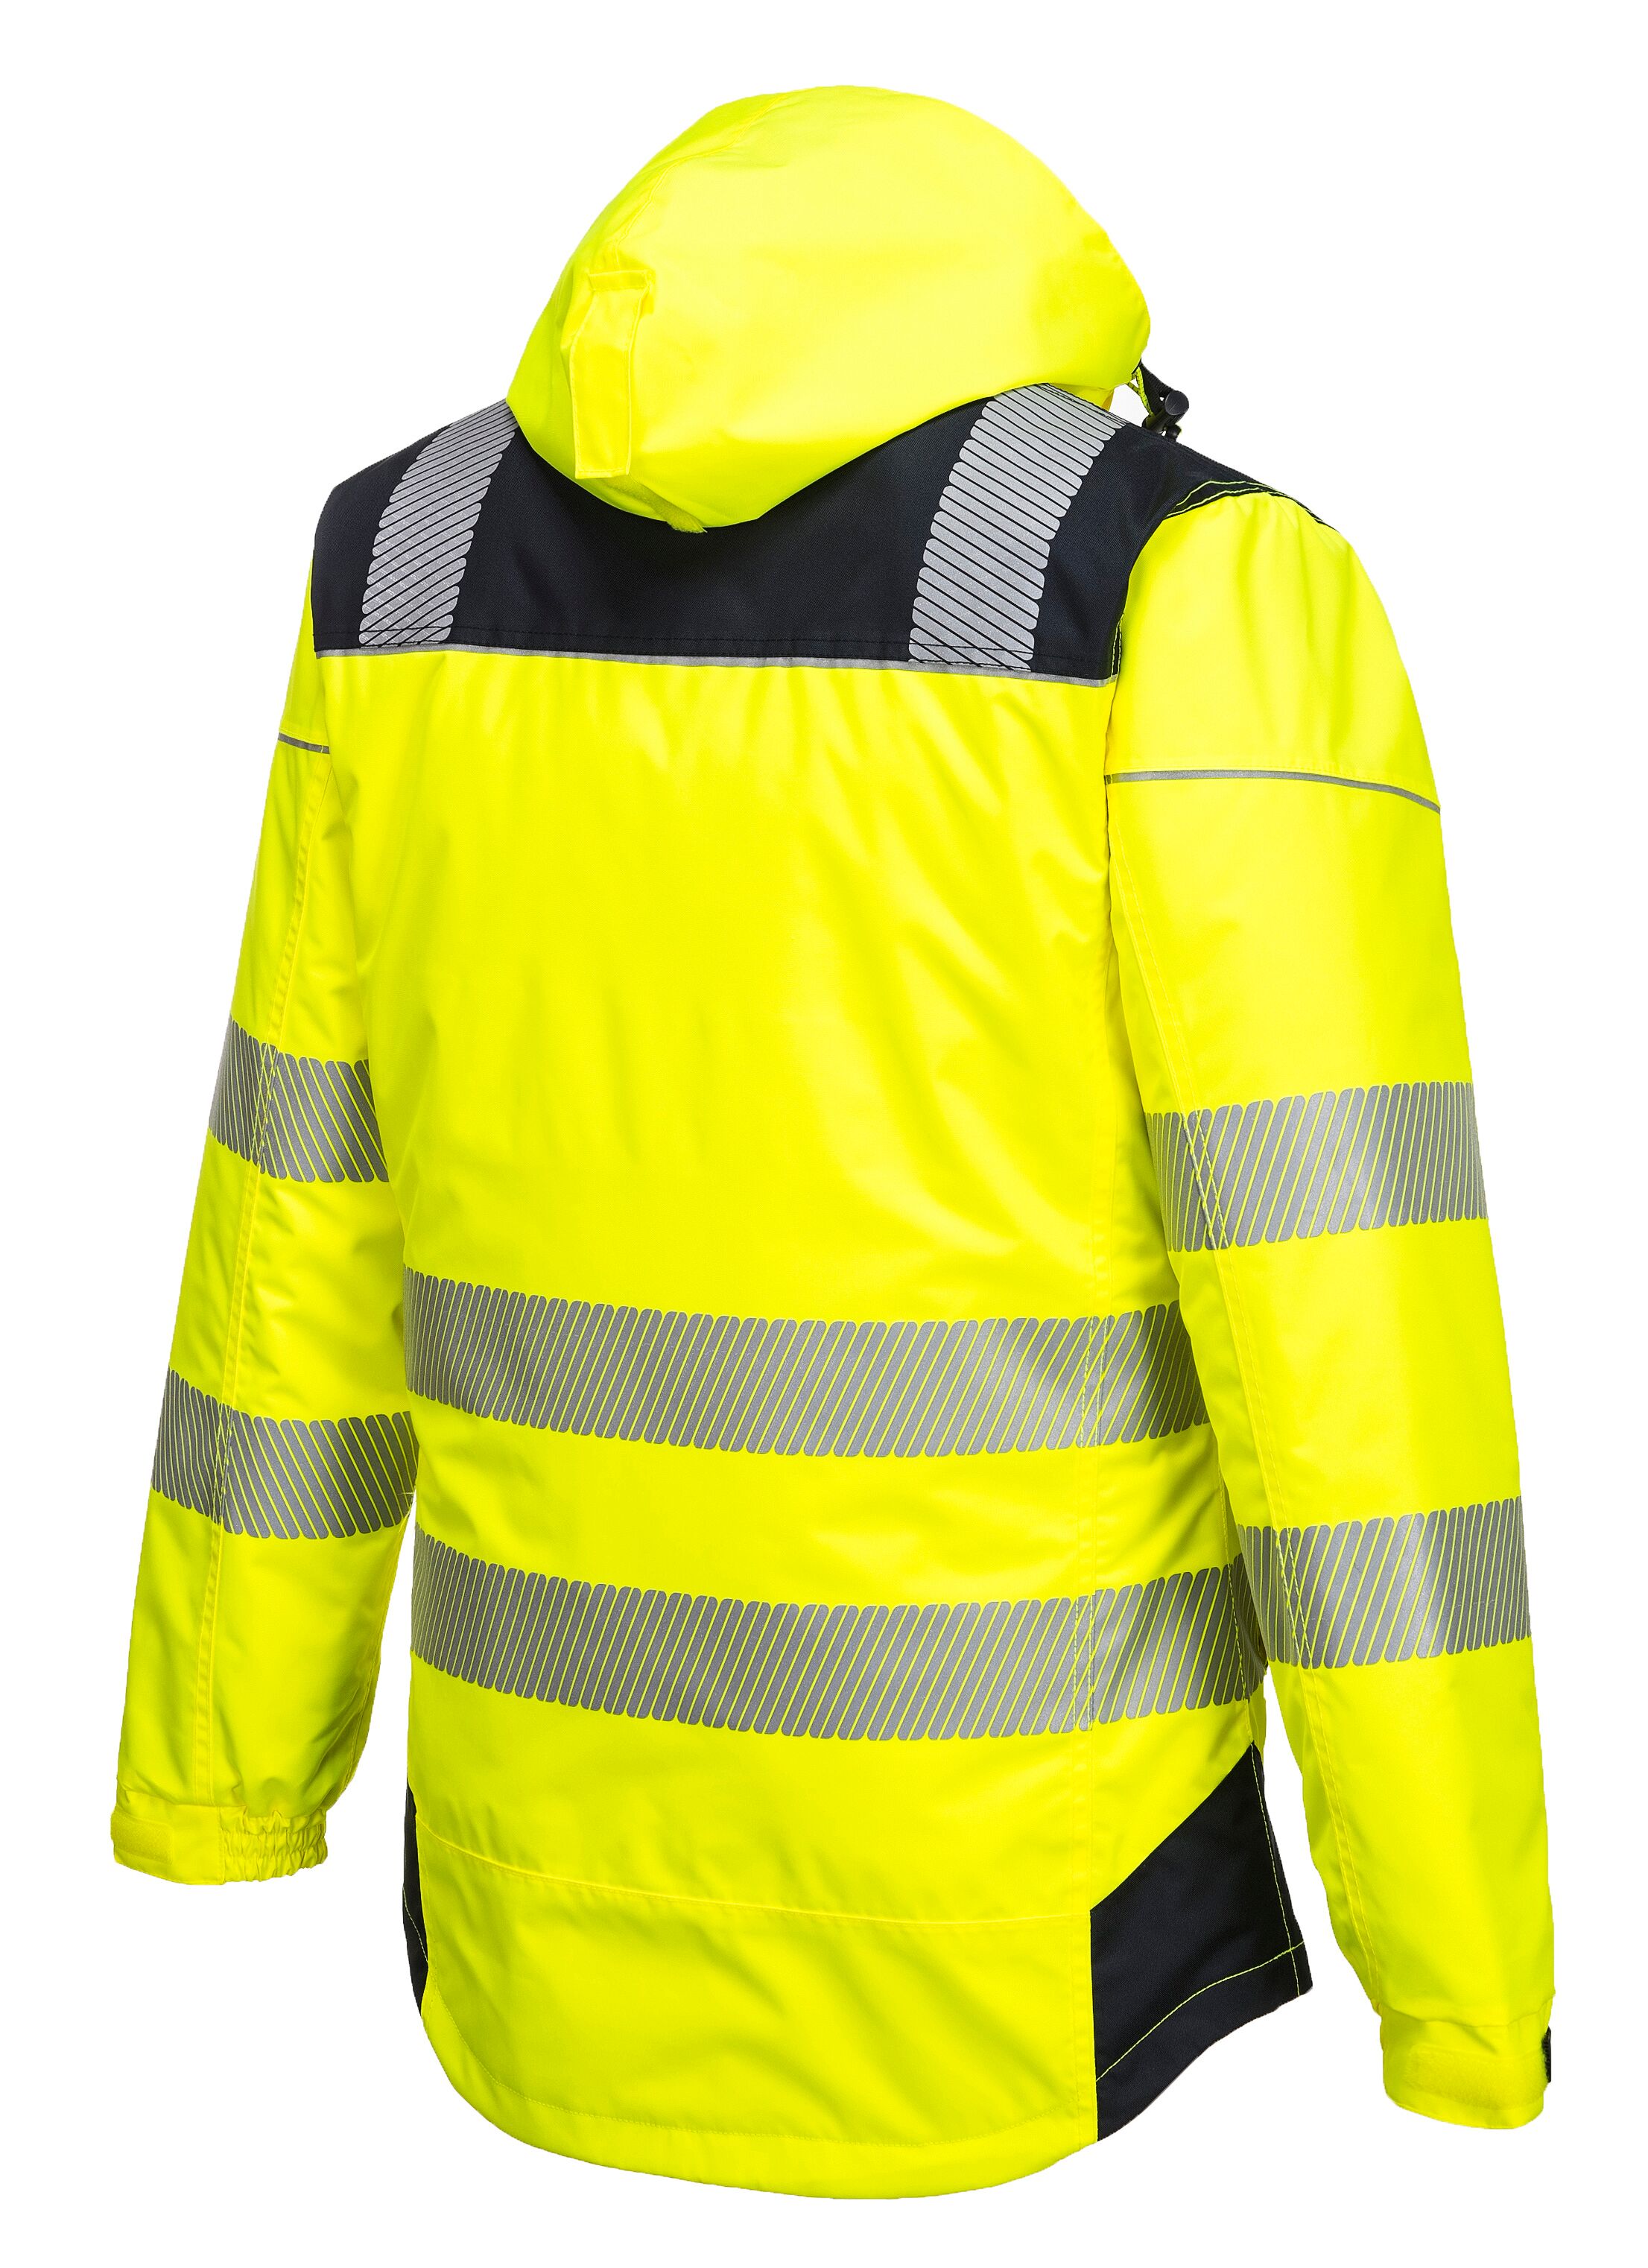 Portwest PW3 HiVis Winter Jacket Work Safety Protective Reflective Waterproof Coat ANSI 3 T400